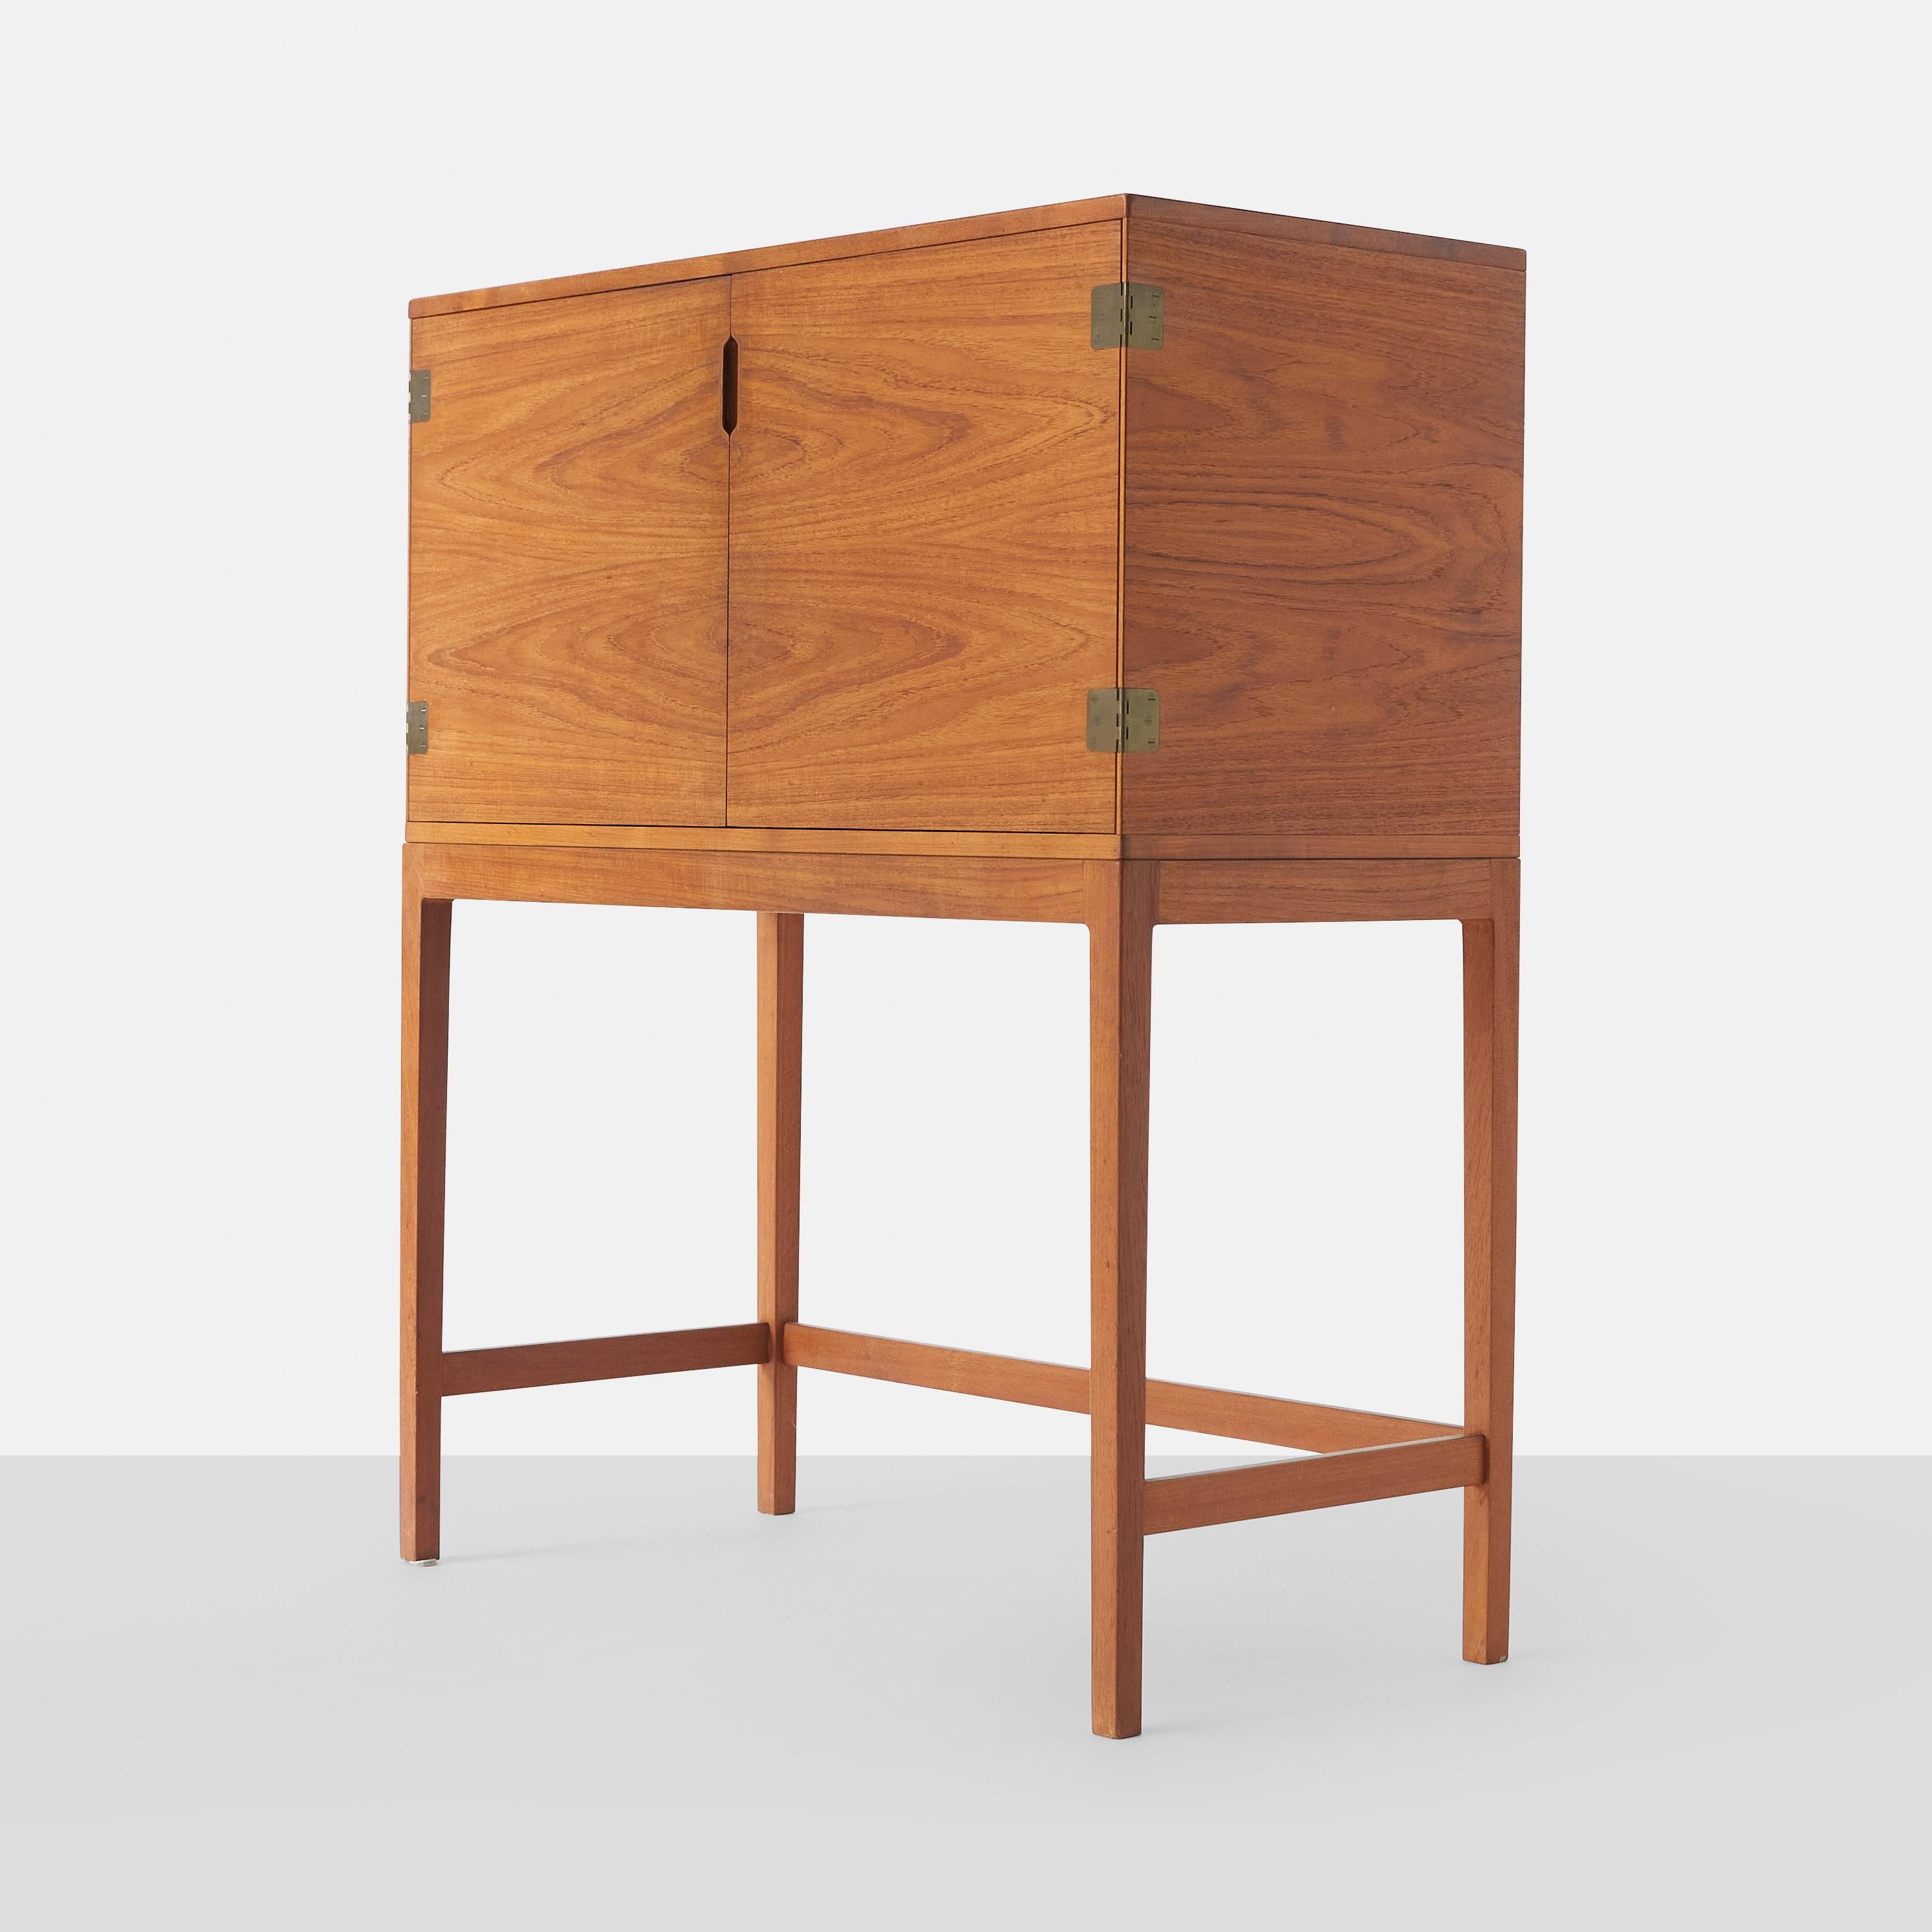 A Svend Langkilde teak cabinet with two doors enclosing adjustable shelves and four drawers. Doors with brass fittings.